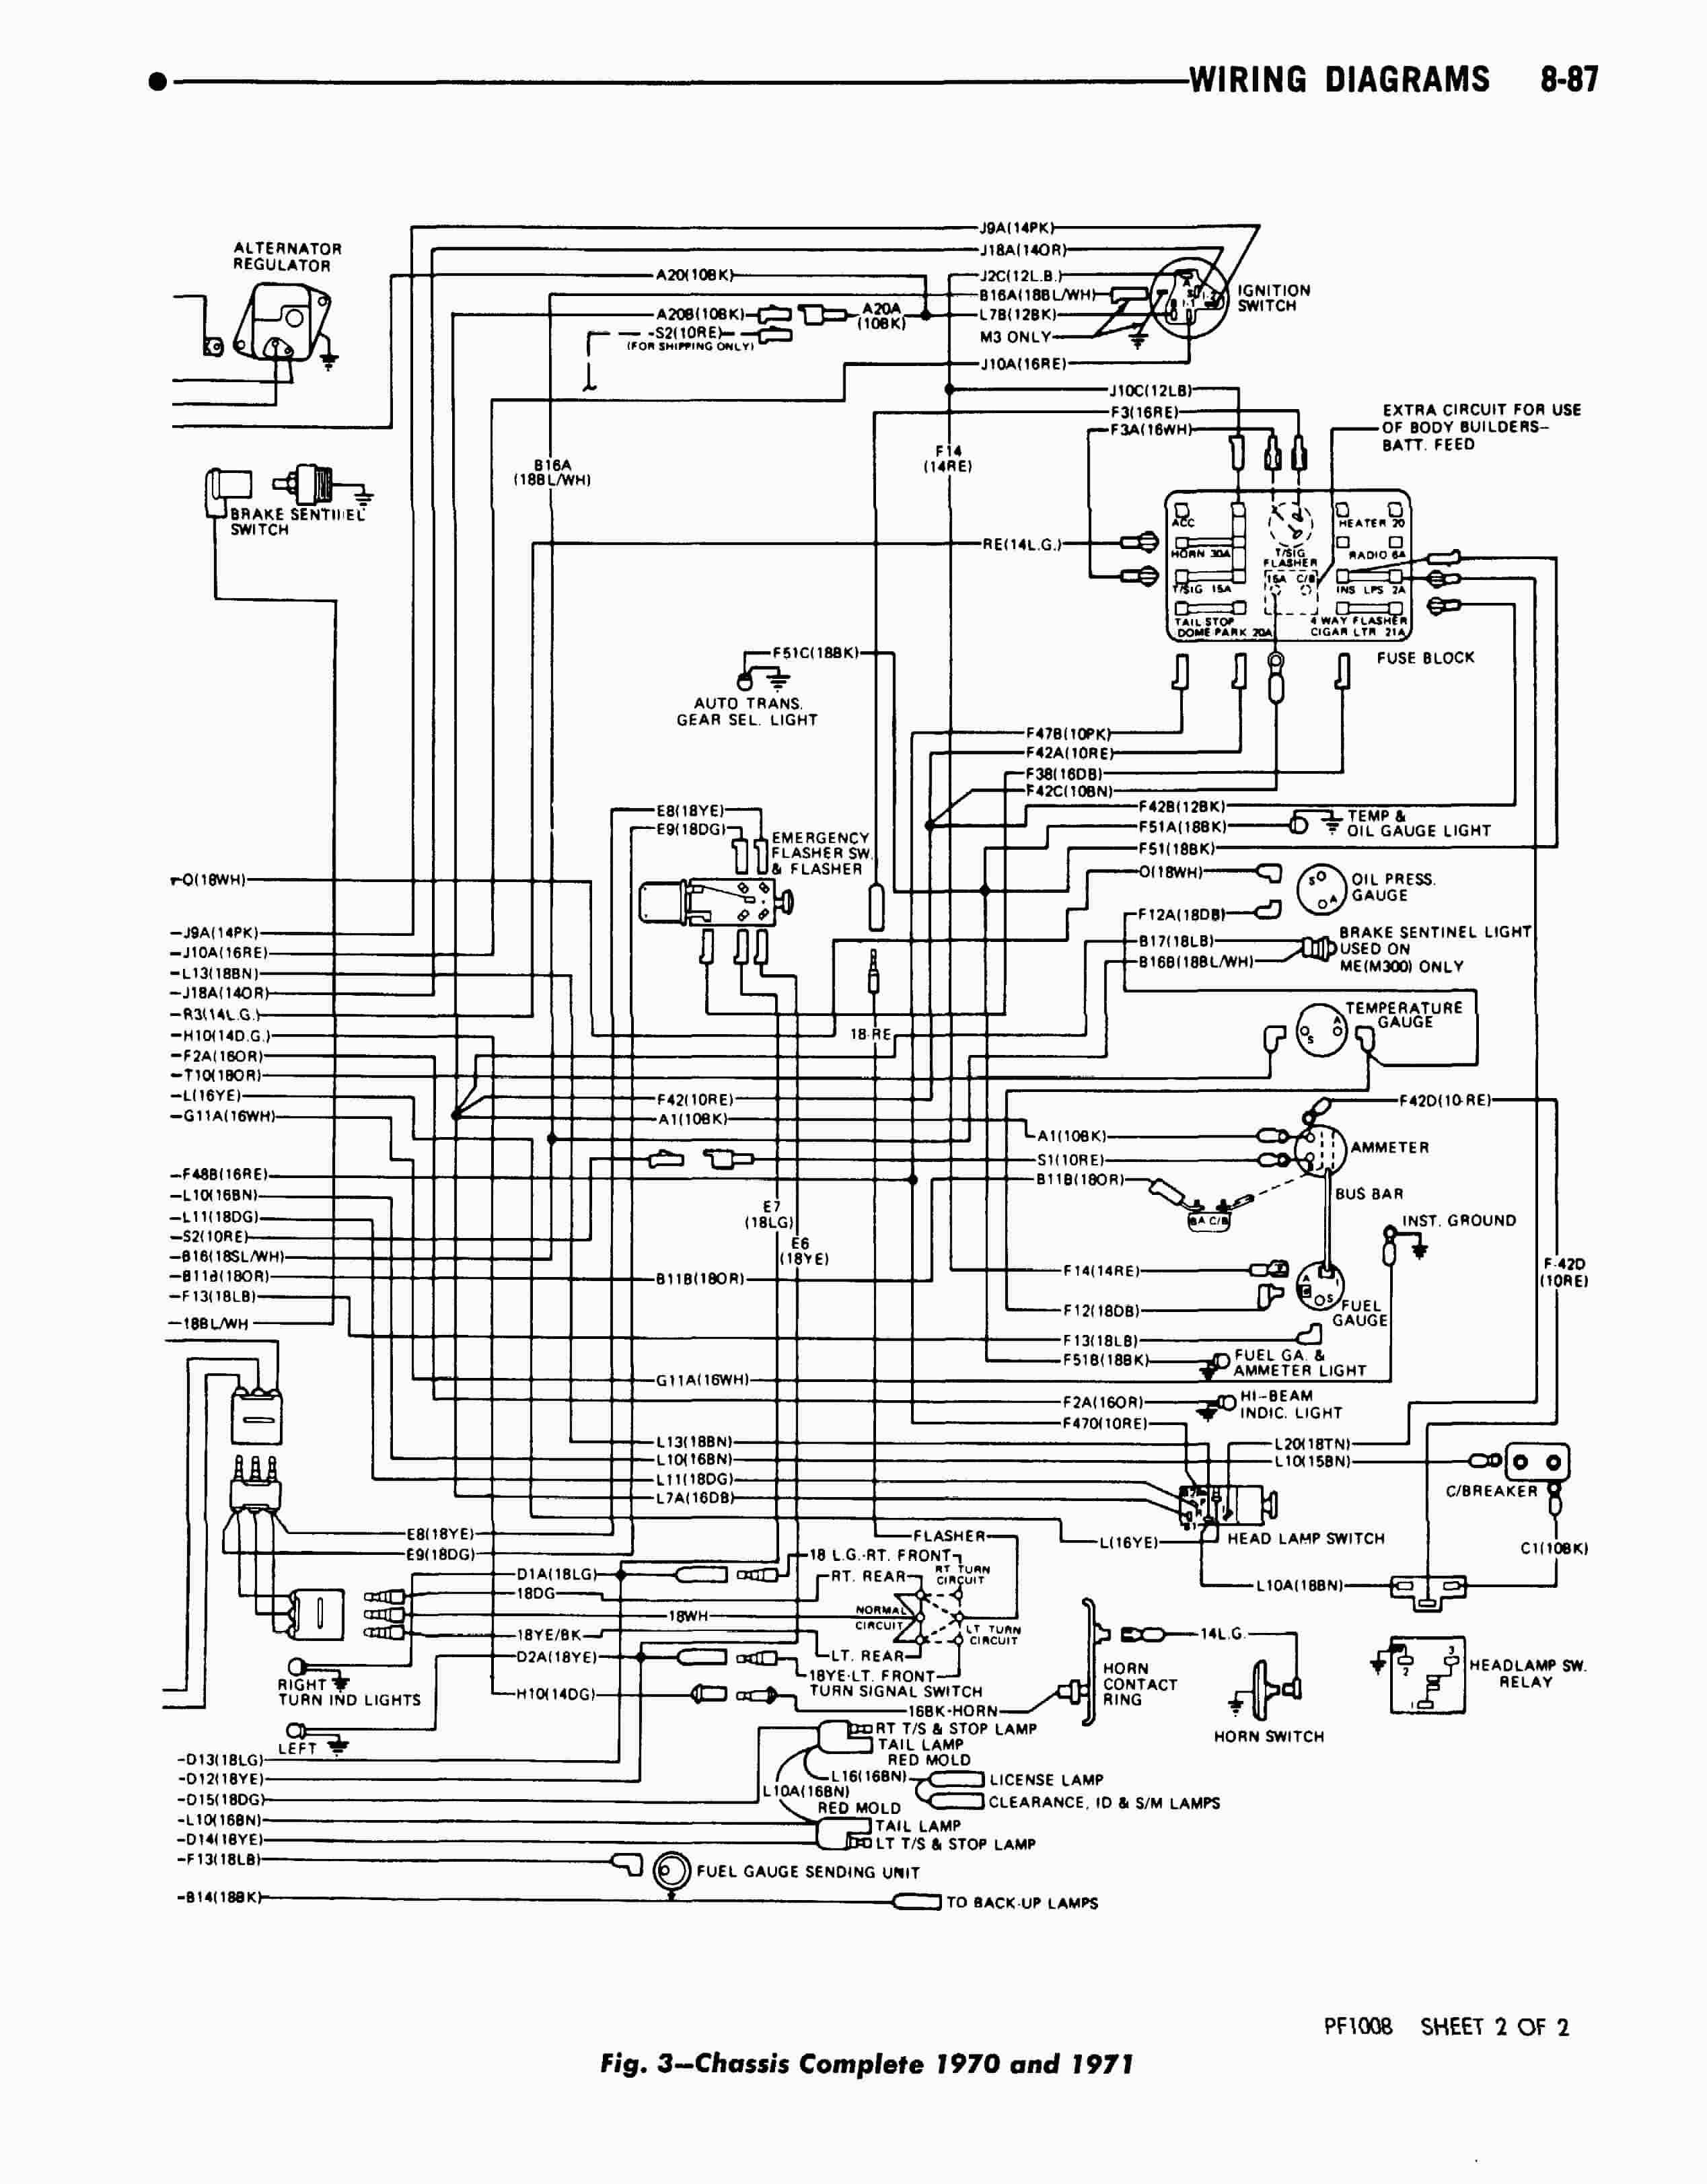 Dave's Place - 70-71 Dodge Class A Chassis Wiring Diagram Dodge Challenger Wiring-Diagram Daves Place